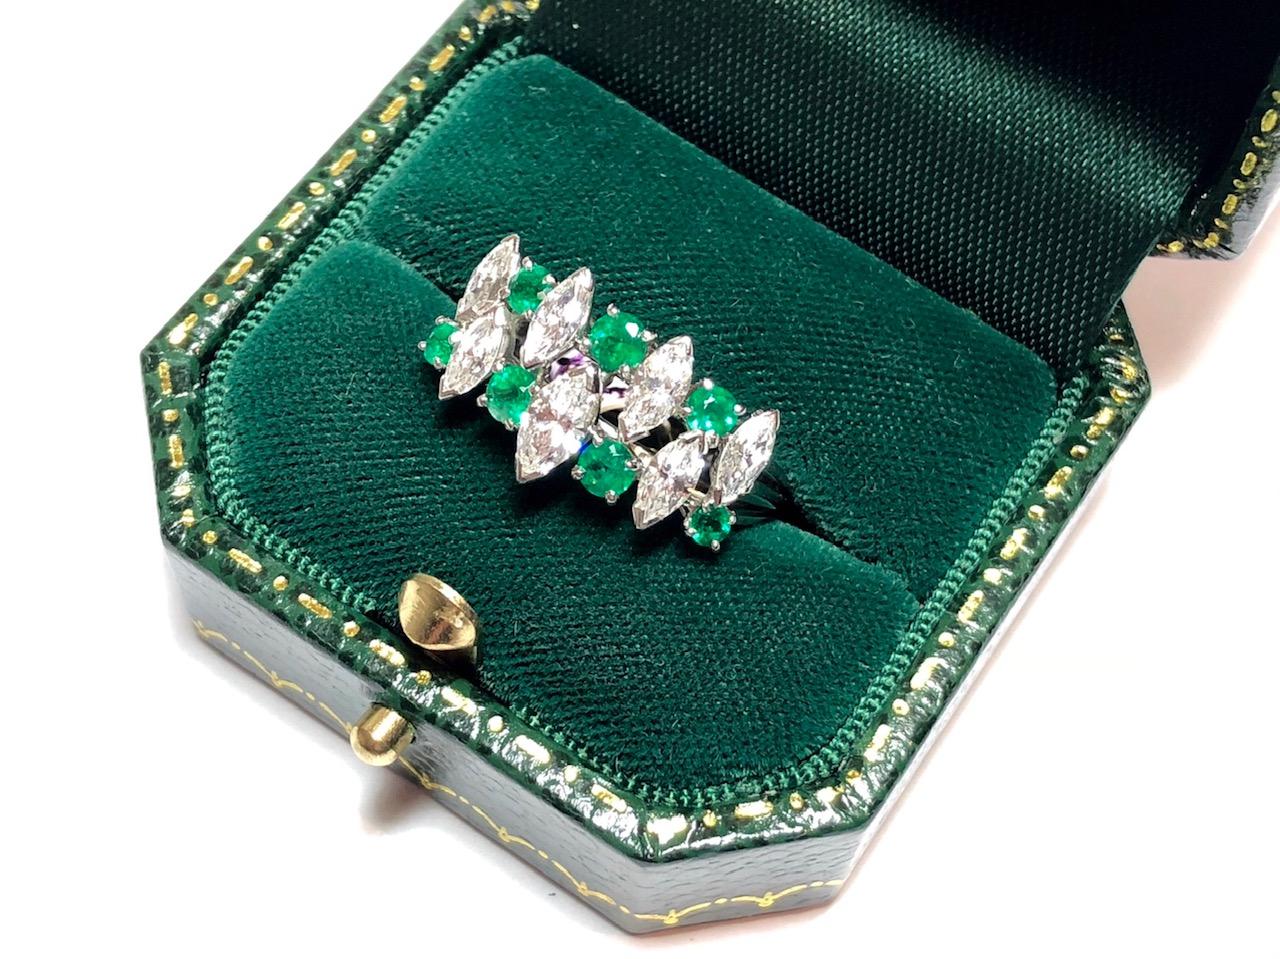 An emerald and diamond ring by Oscar Heyman, with two rows of alternating marquise-cut diamonds and round faceted emeralds. Mounted in Platinum. Signed and numbered. Estimated total diamond weight 1.20ct.

Finger size UK M / US 6.